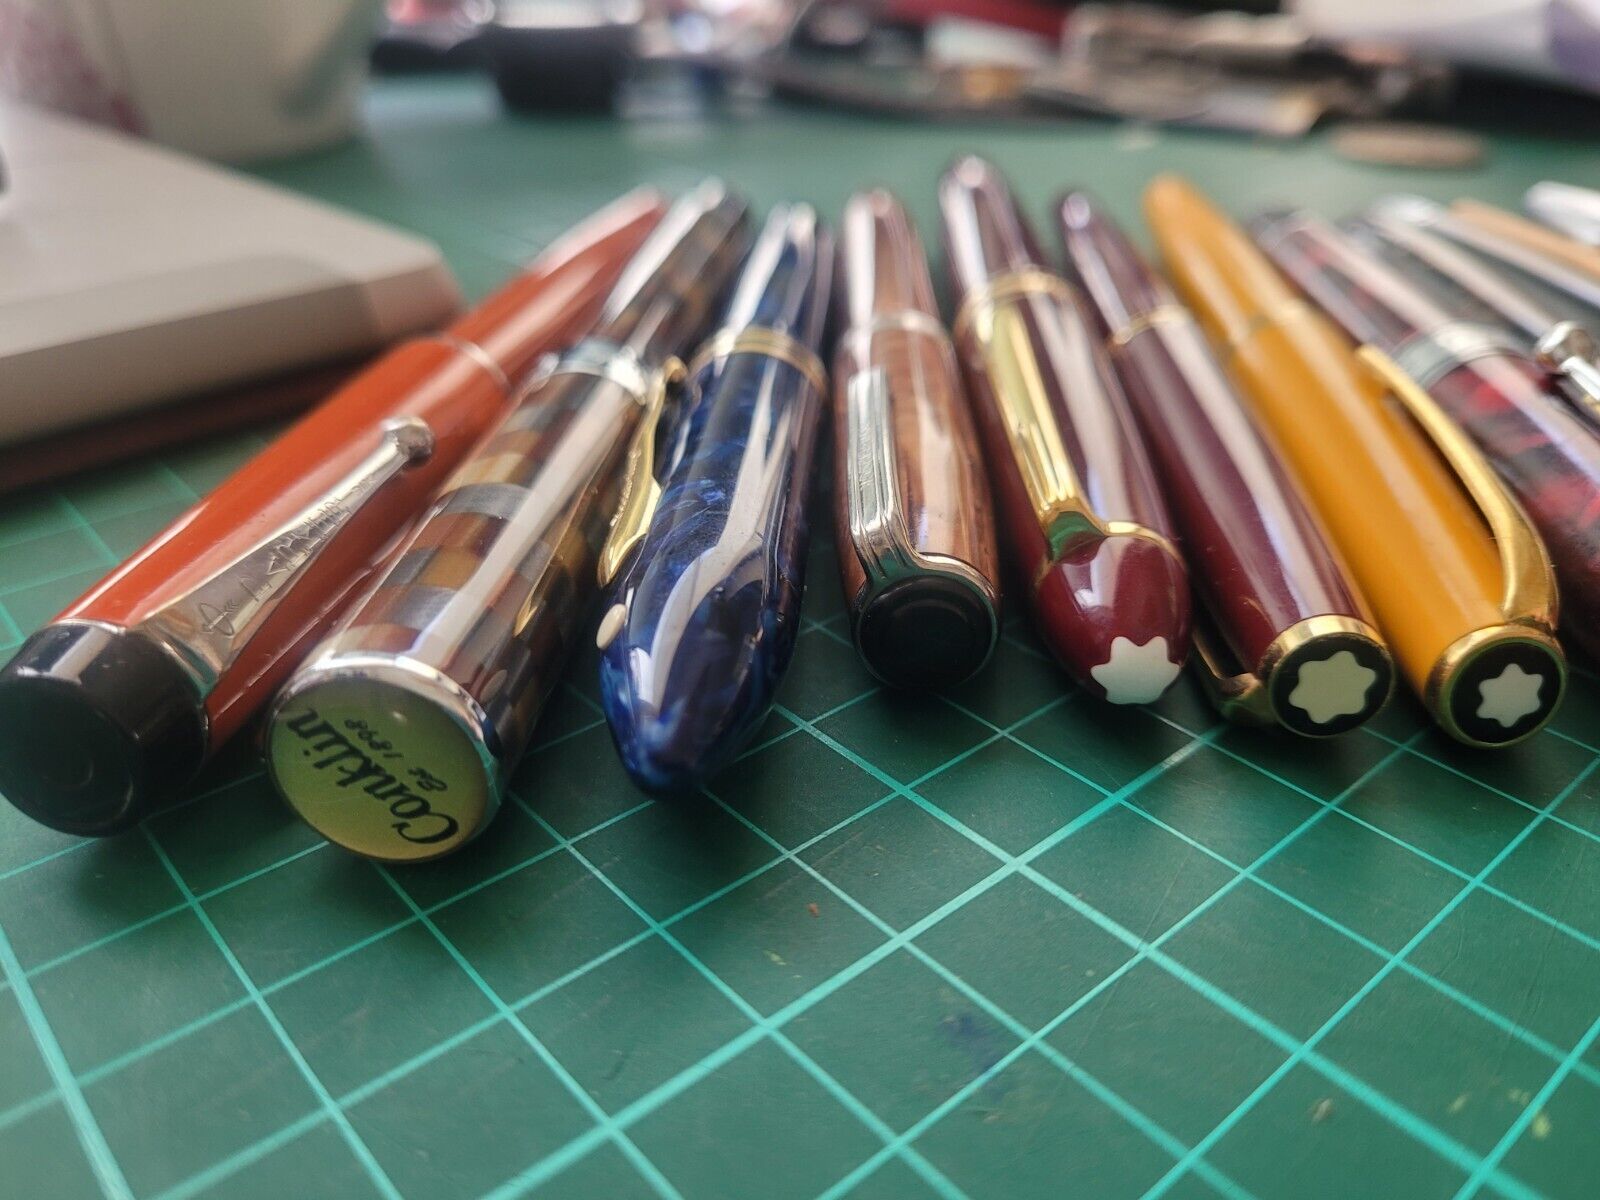 Pen Collection Mont blonc. Conklin. Maybe Todd. Cross. Faber Castell. Parker. Sh